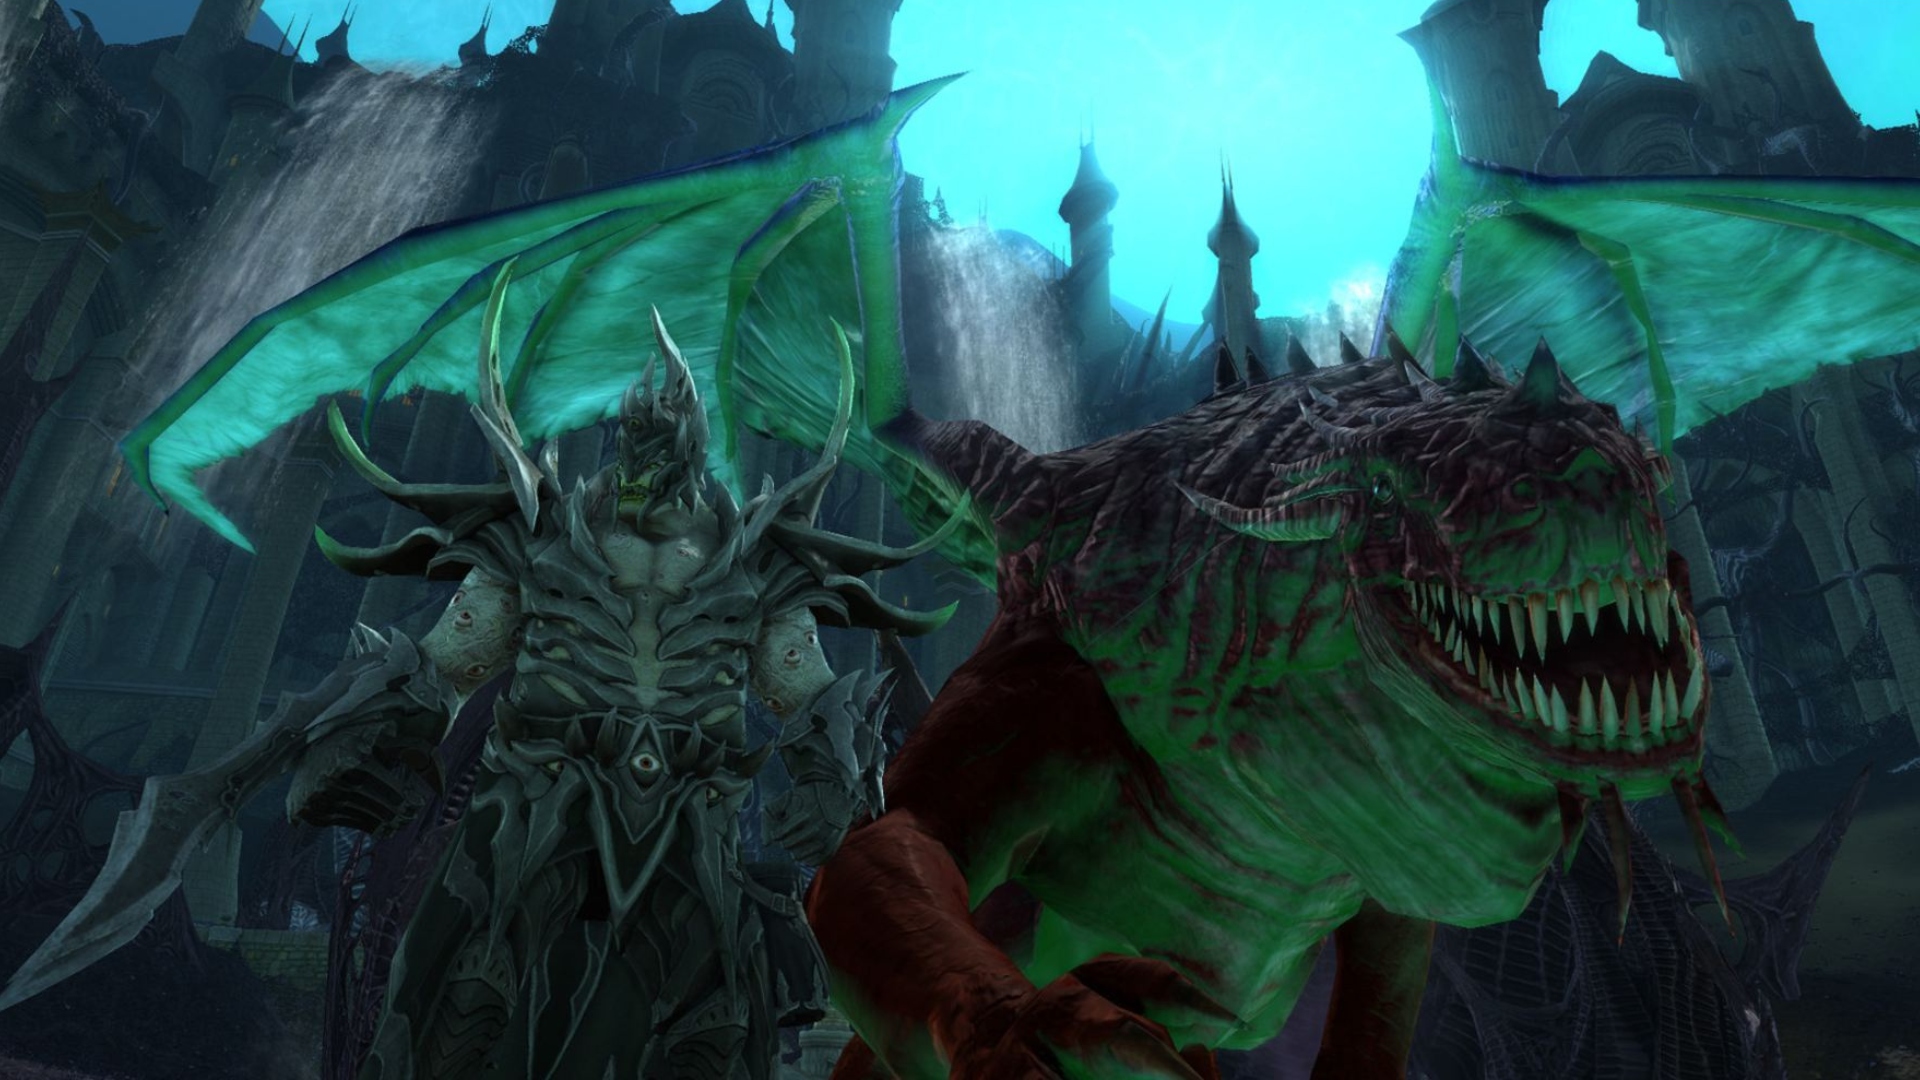 Best dragon games: Rift. Image shows a dragon and a warrior.